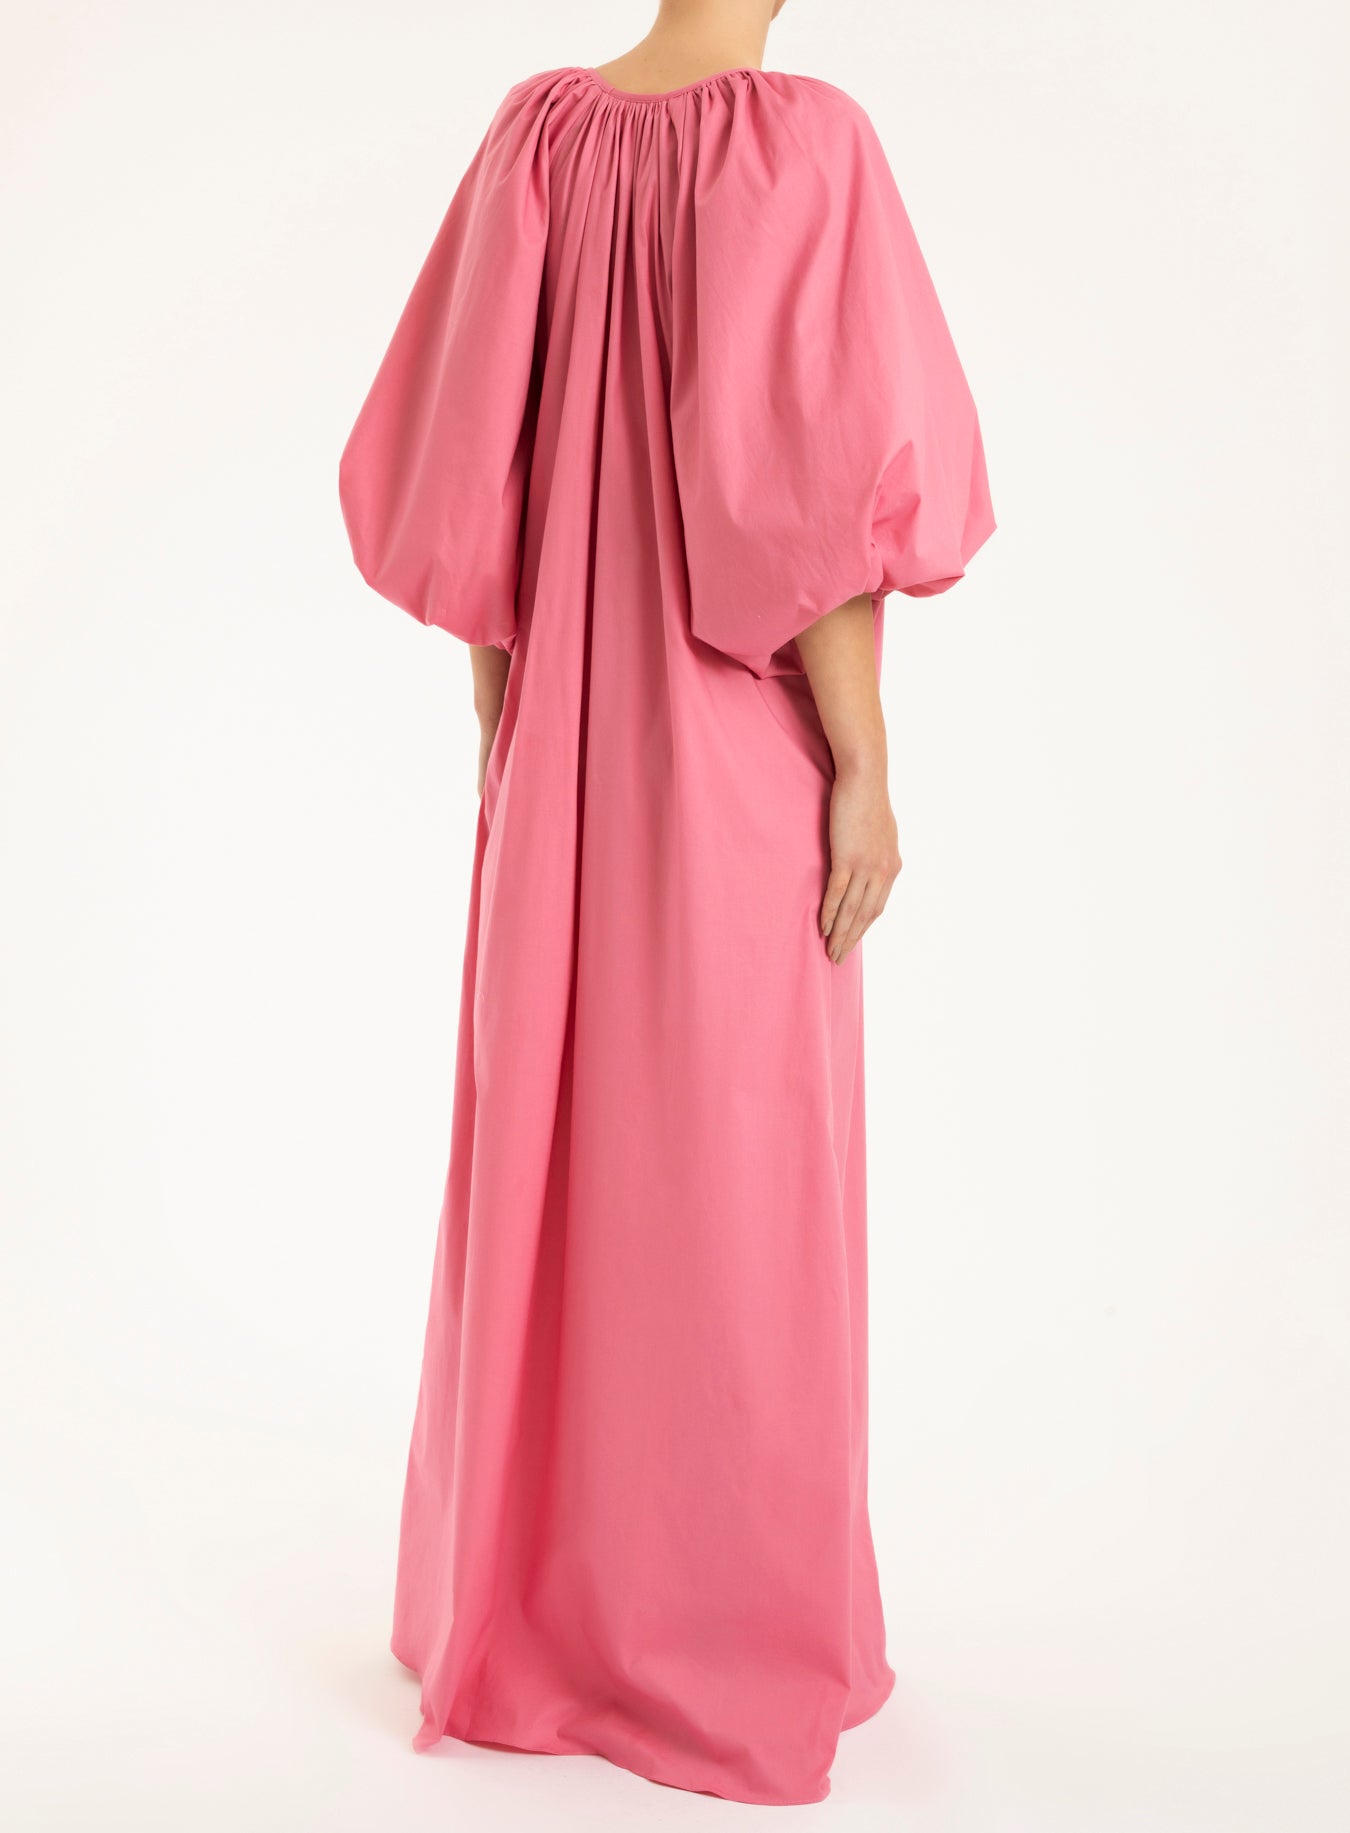 Effortless Chic Pink Puff-Sleeved Long Dress Back